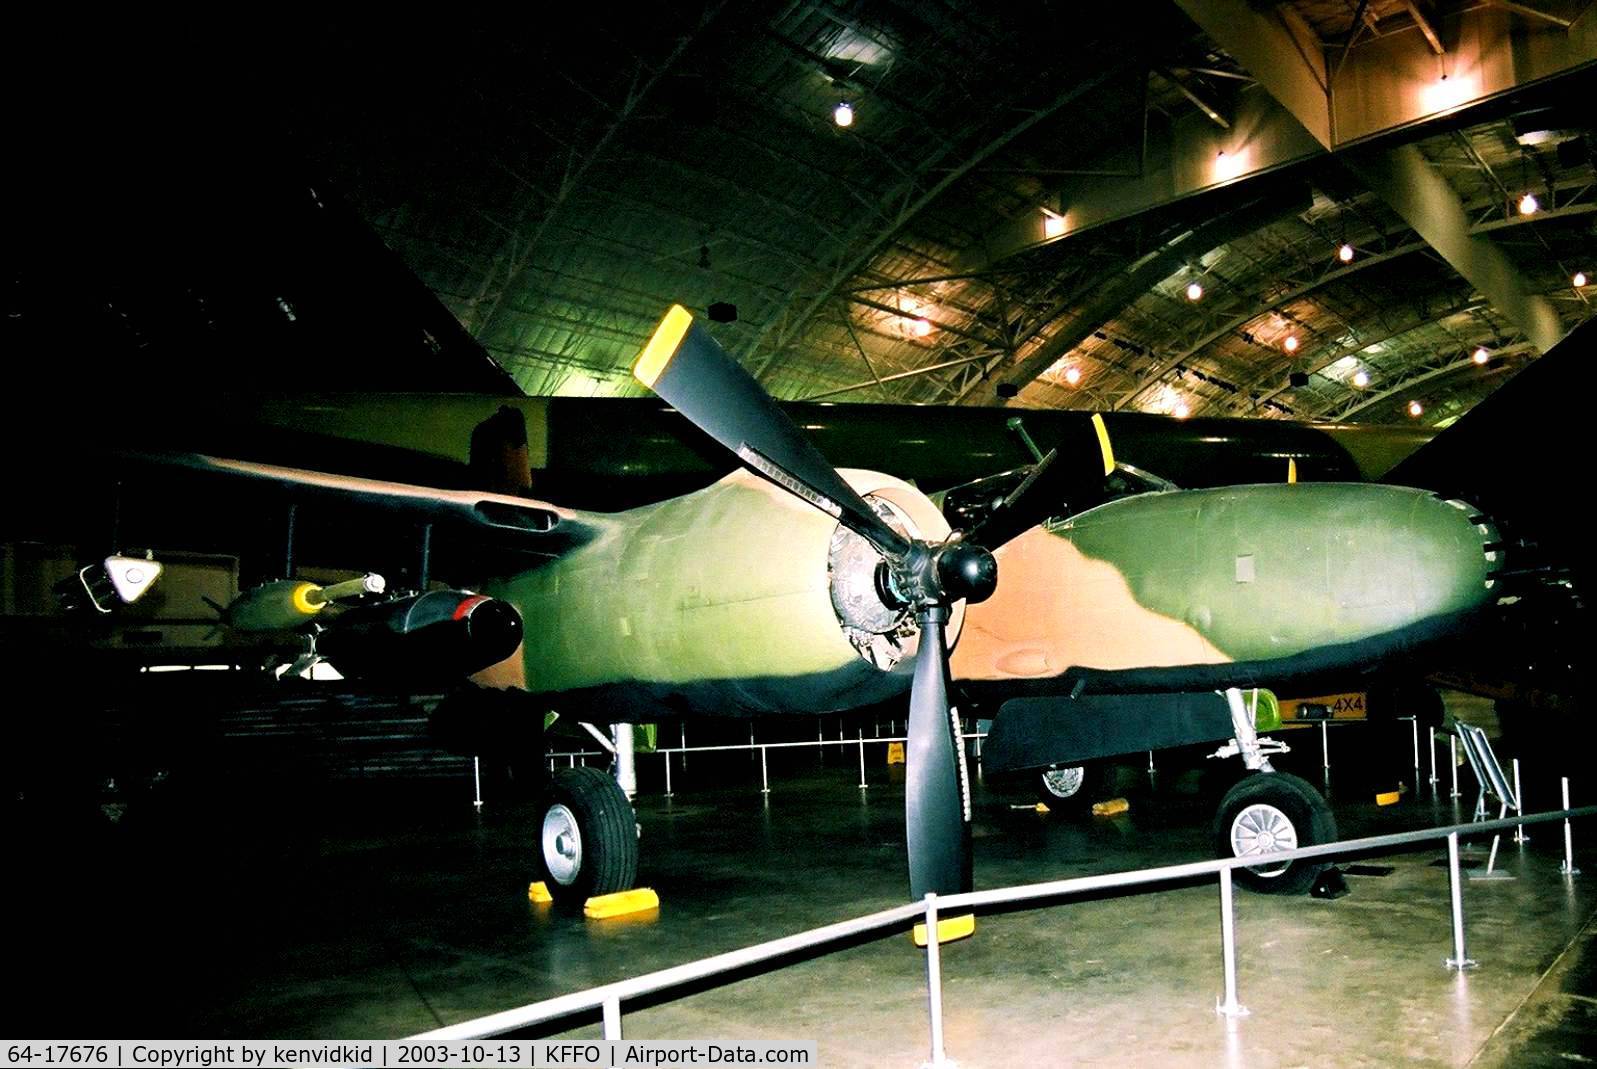 64-17676, 1971 Douglas-On Mark B-26K Counter Invader C/N 7309 (was 41-39596), At The Museum of the United States Air Force Dayton Ohio.